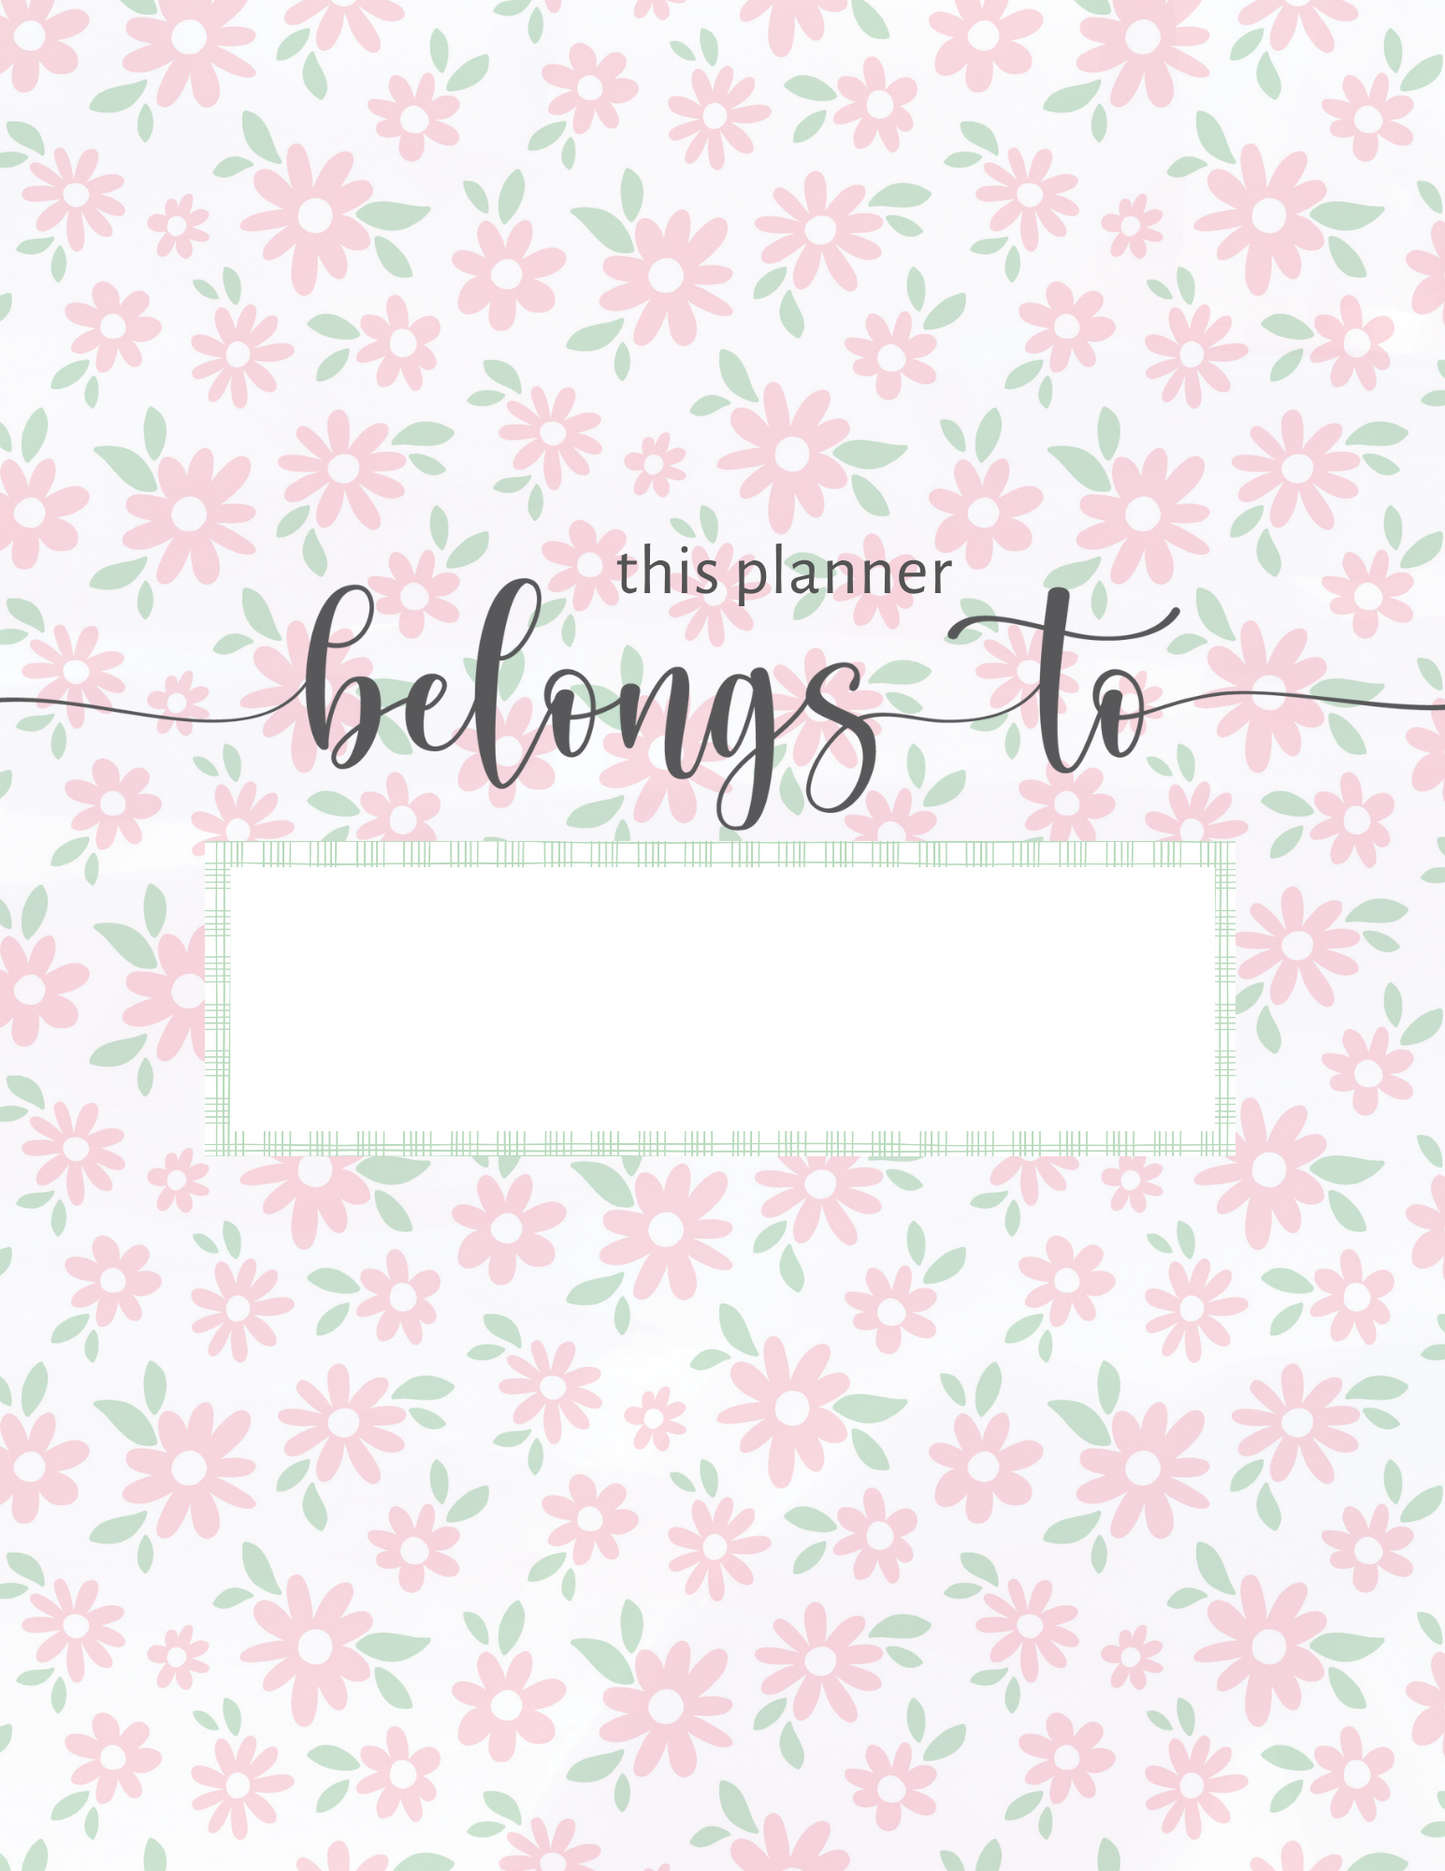 Self Care Planner with Pretty Pink Daisies